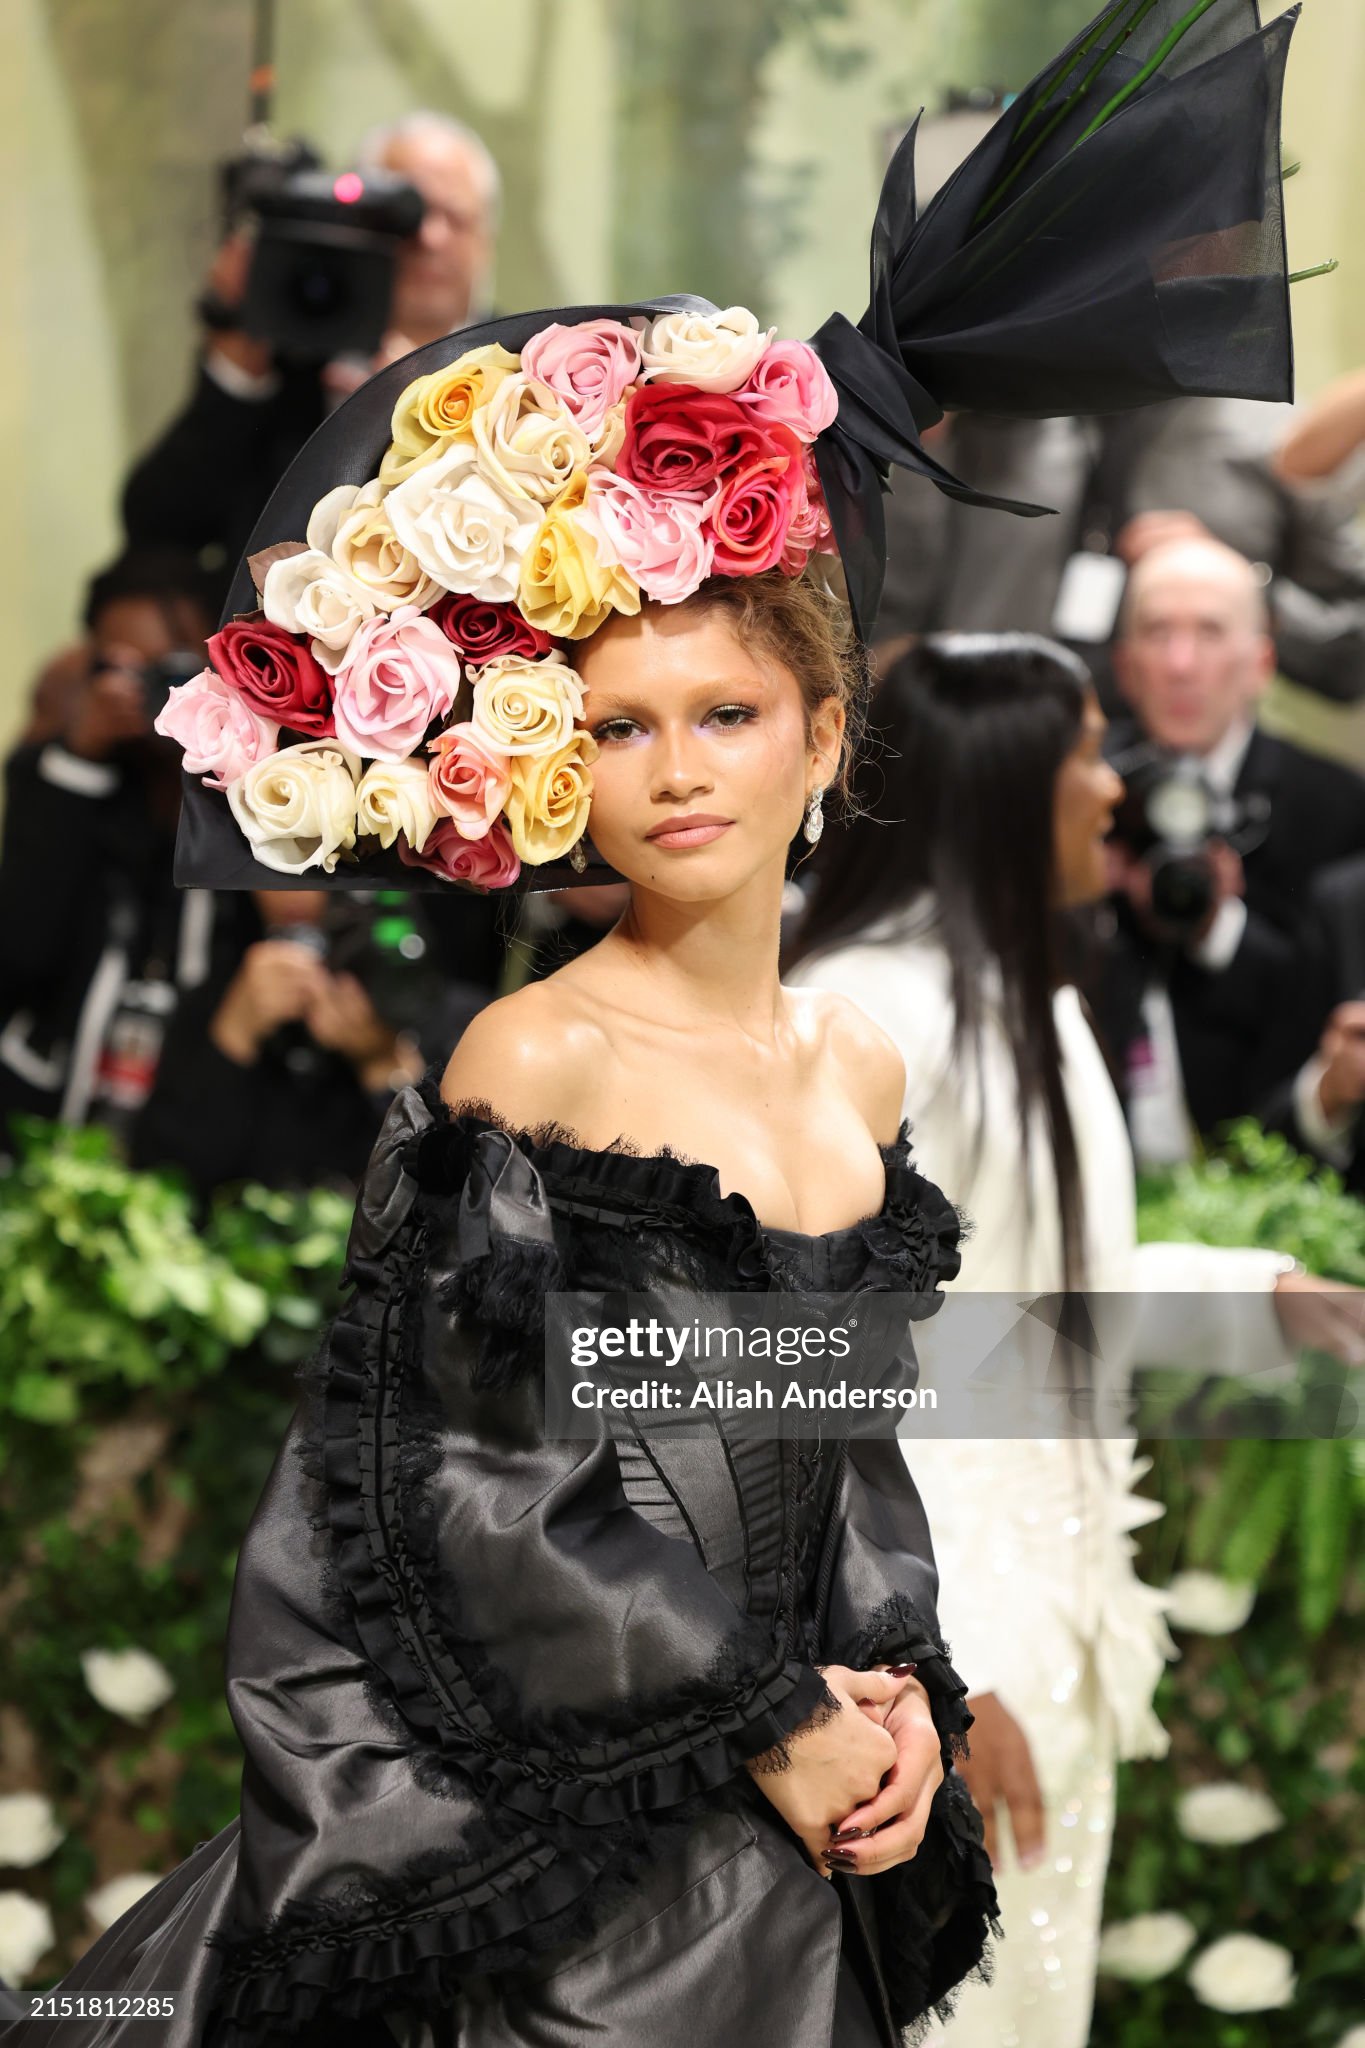 gettyimages-2151812285-2048x2048.jpg